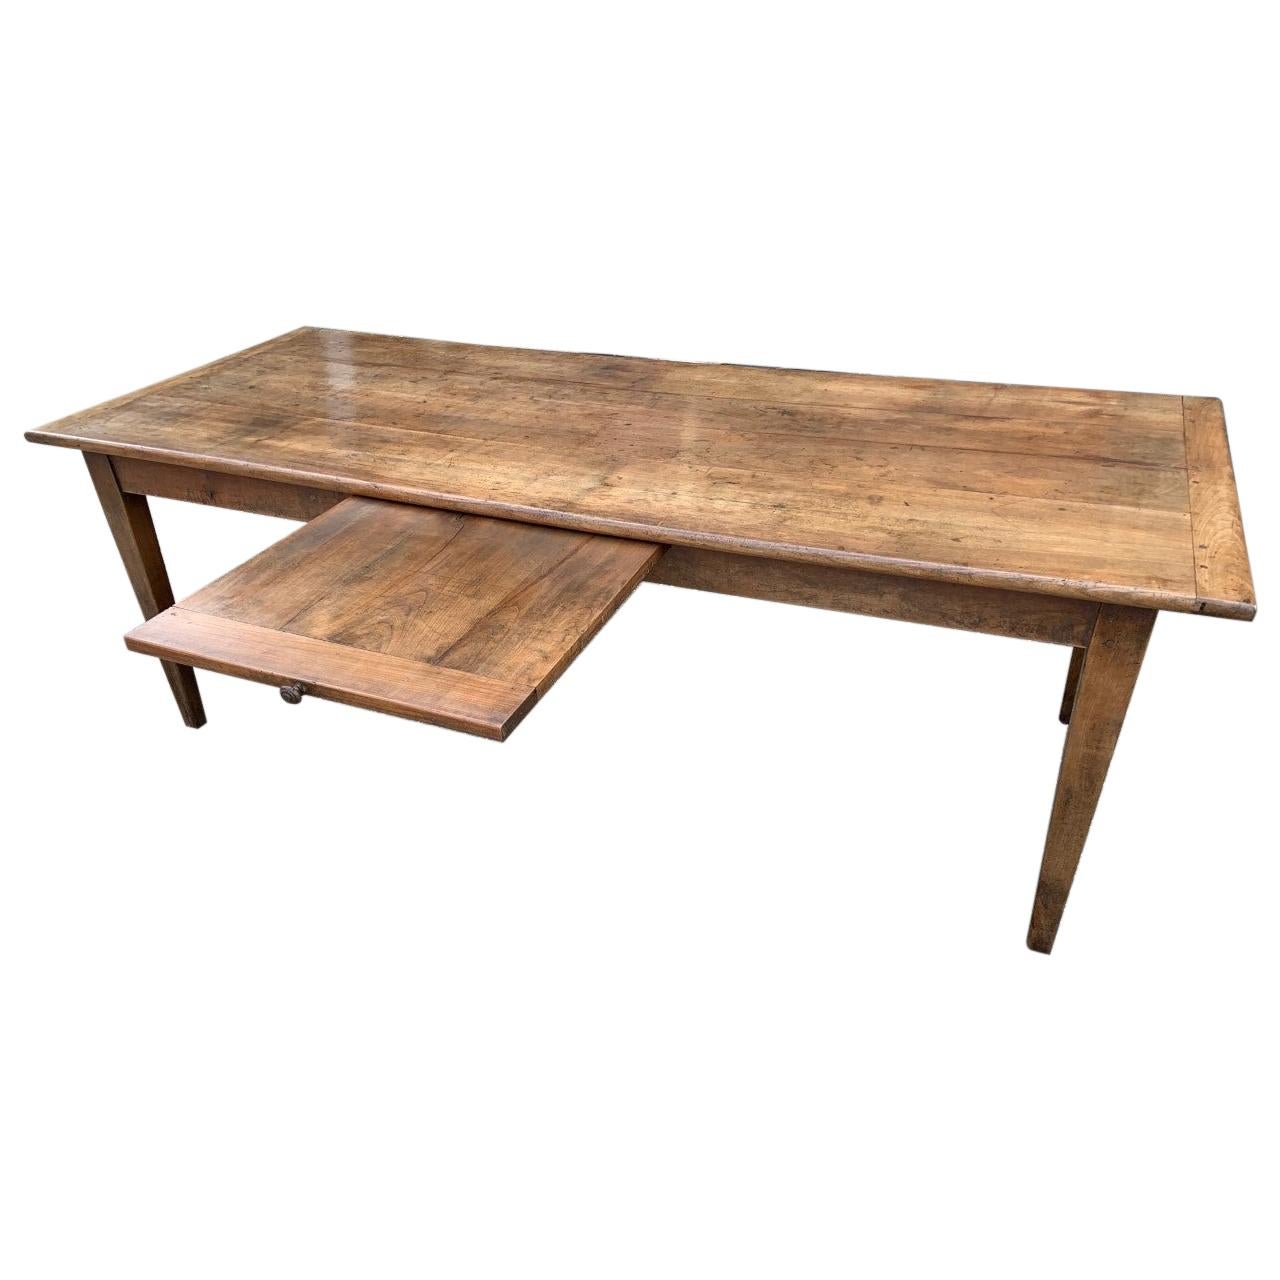 Rustic 19th Century Cherry Farmhouse Table with Bread Slide